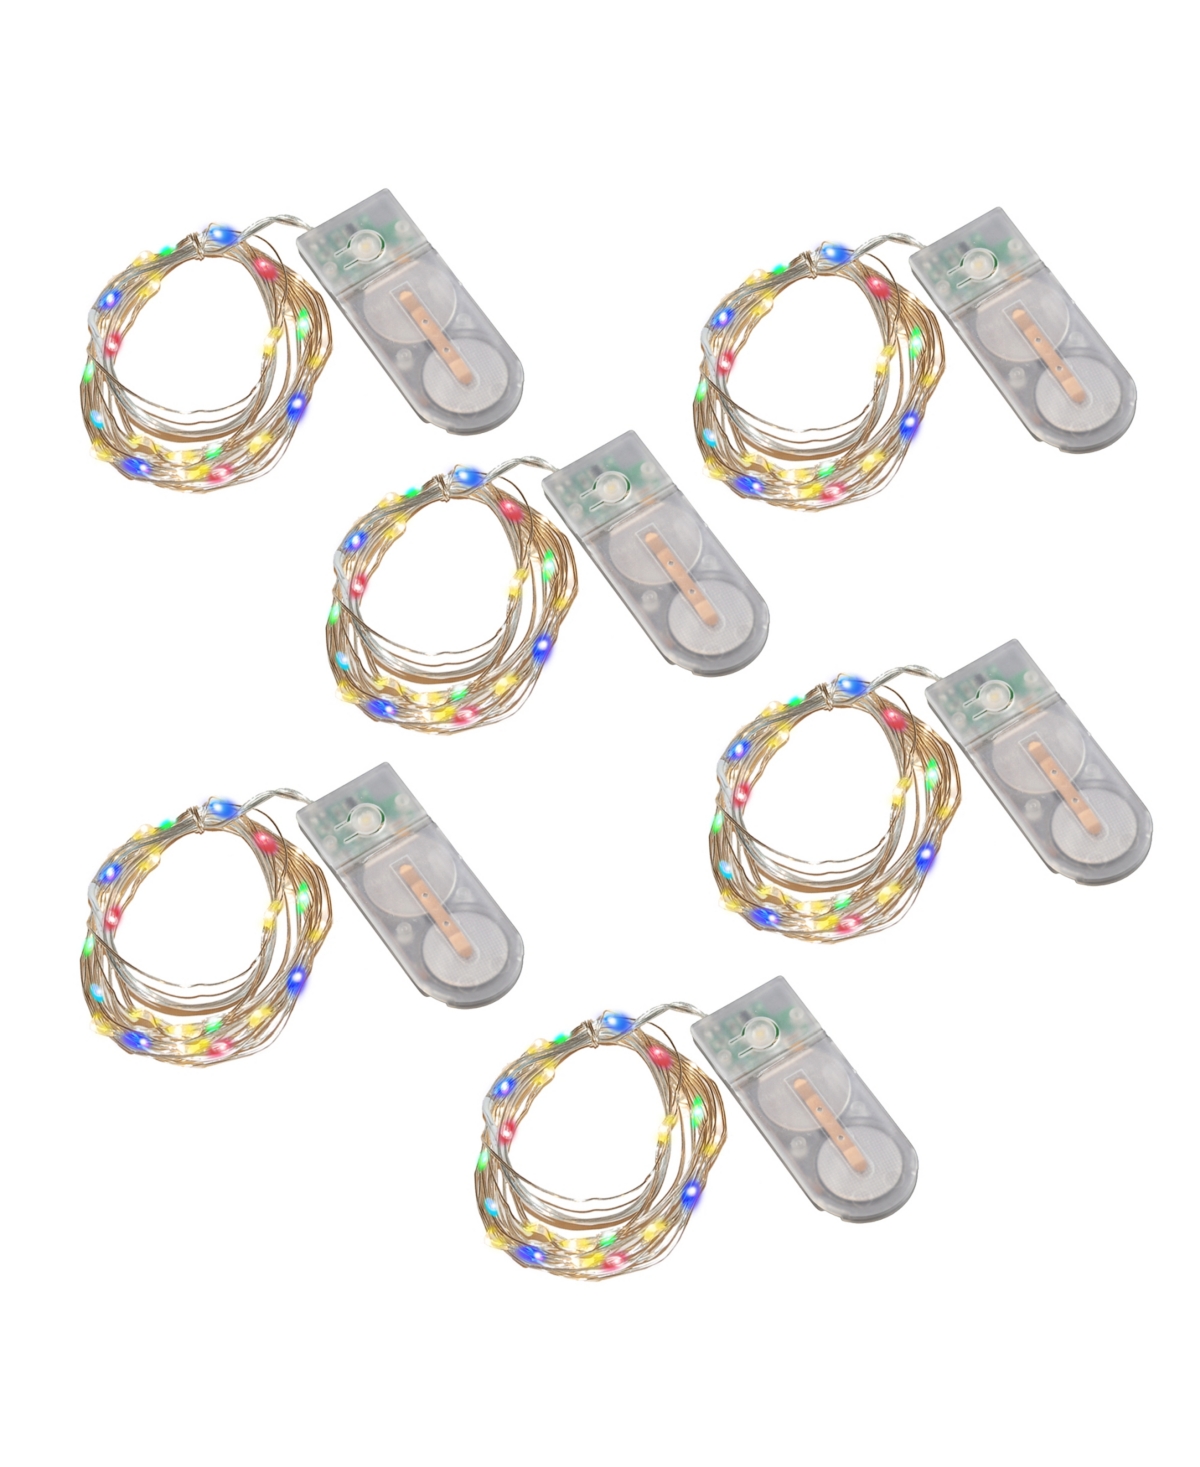 Jh Specialties Inc/lumabase Lumabase Battery Operated Fairy String Lights, Set Of 6 In Multi